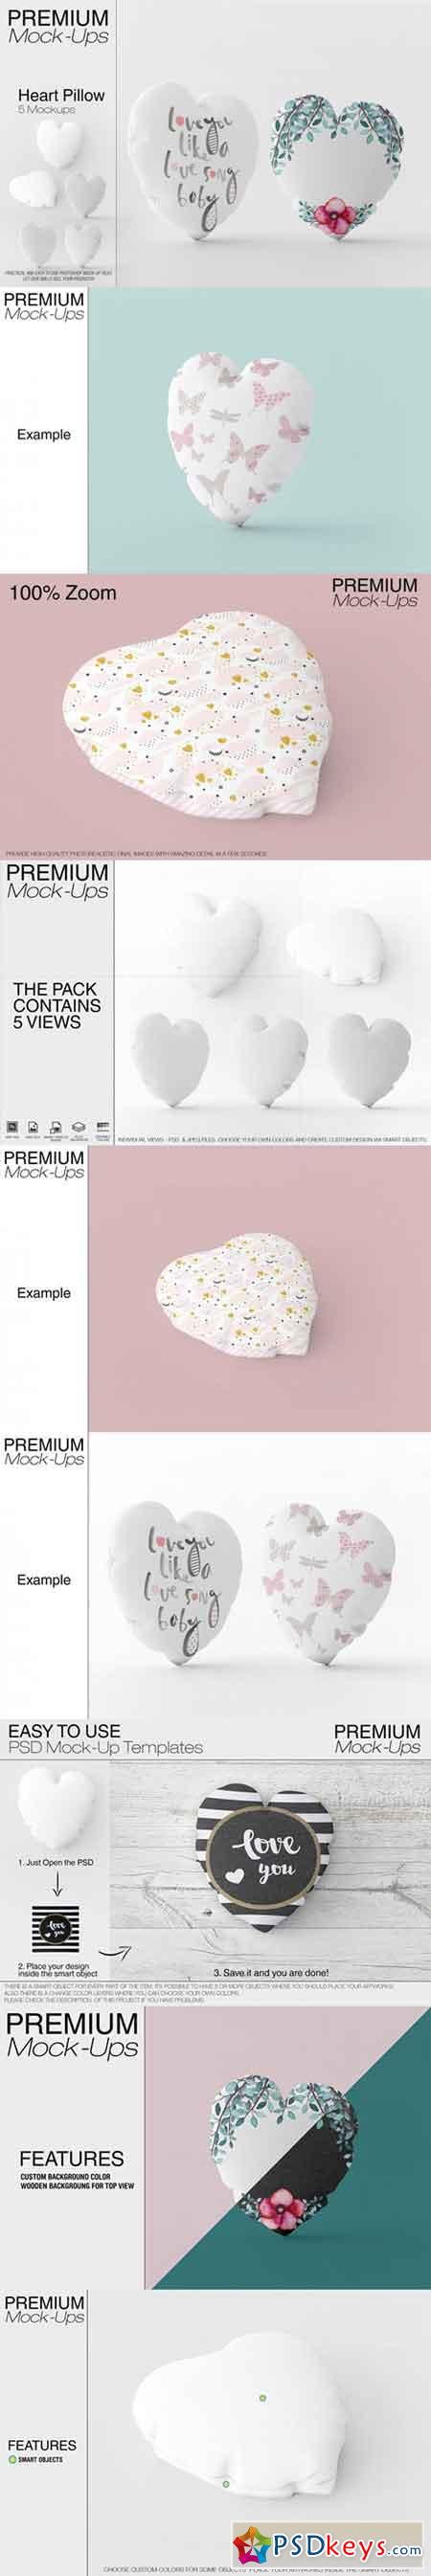 Download Logo And Product Mock Ups Free Download Photoshop Vector Stock Image Via Torrent Zippyshare From Psdkeys Com